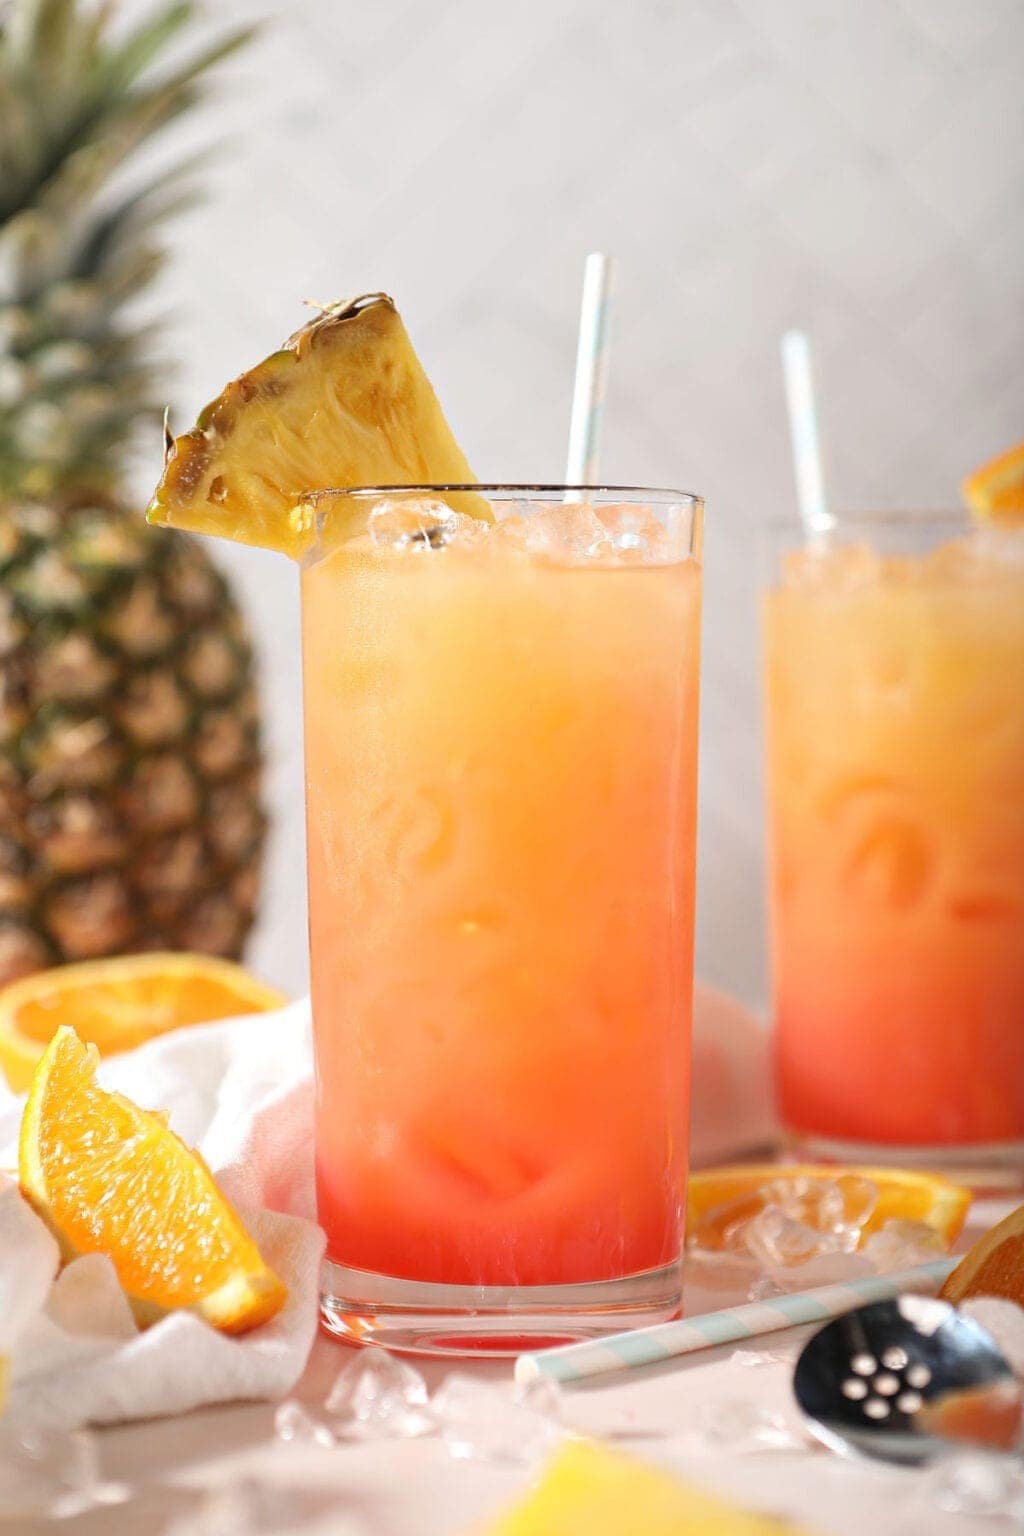 Two glasses of refreshing orange and pineapple juice with a slice of pineapple on top.